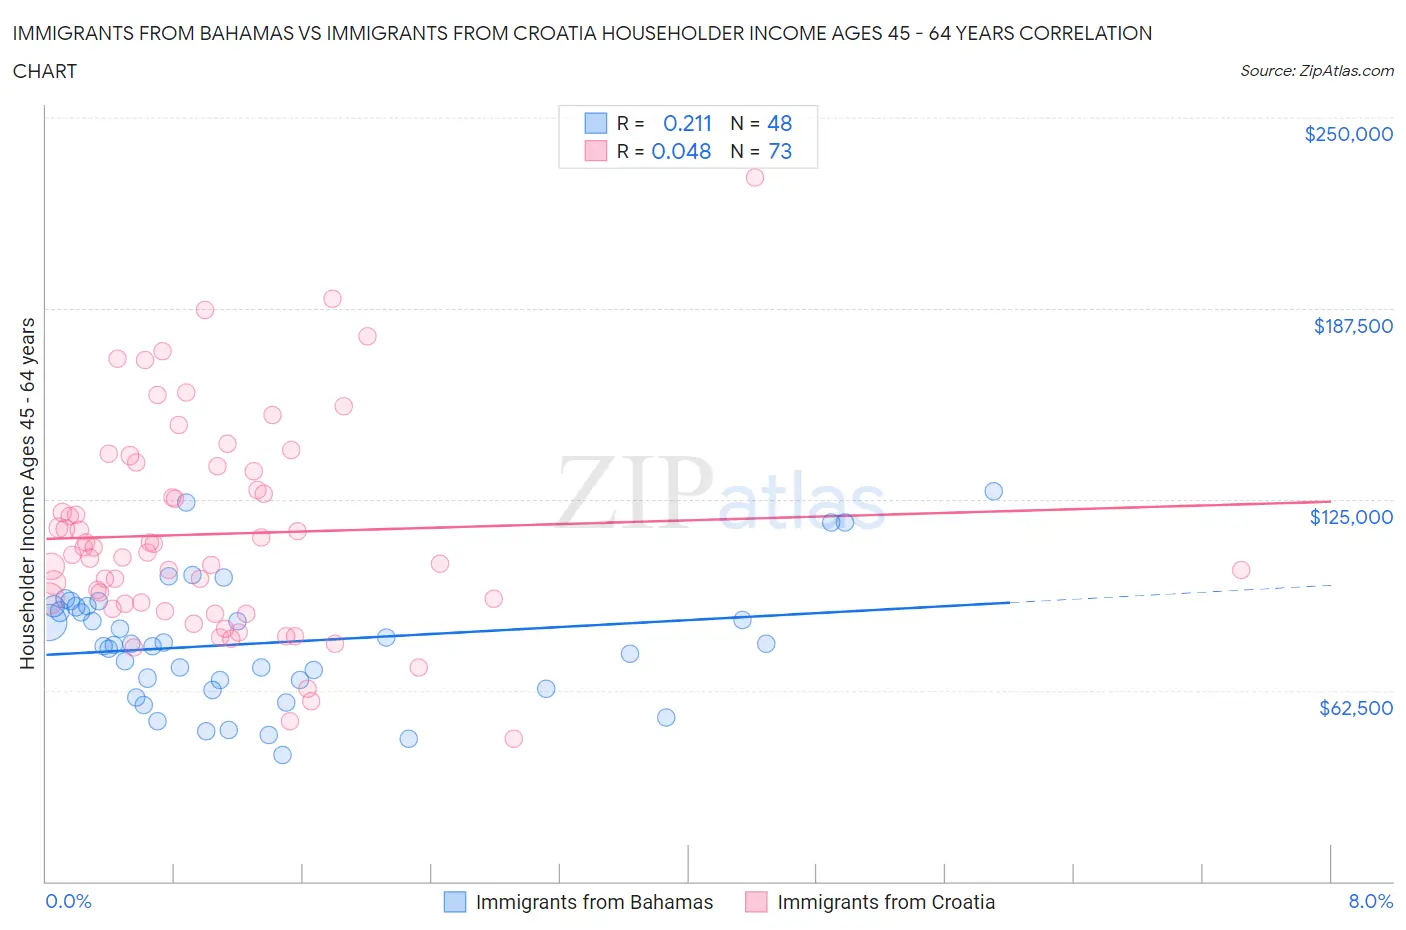 Immigrants from Bahamas vs Immigrants from Croatia Householder Income Ages 45 - 64 years